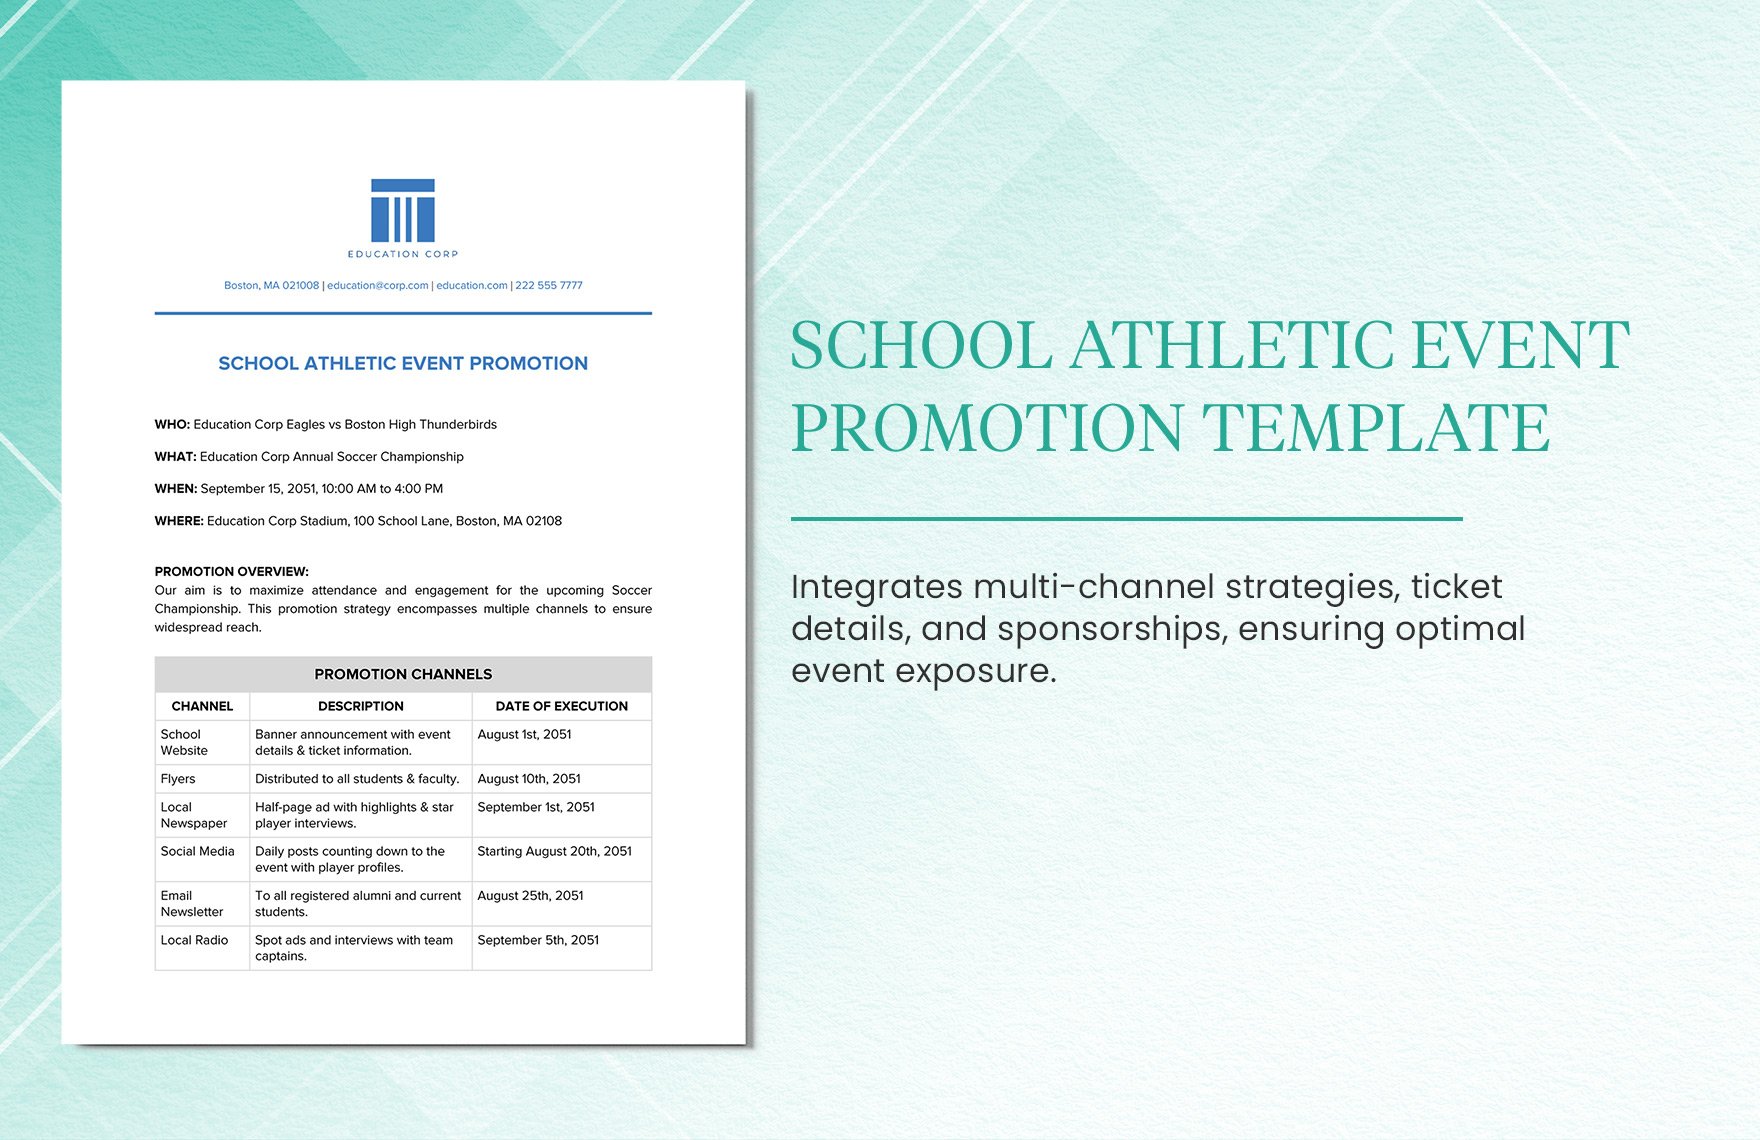 School Athletic Event Promotion Template